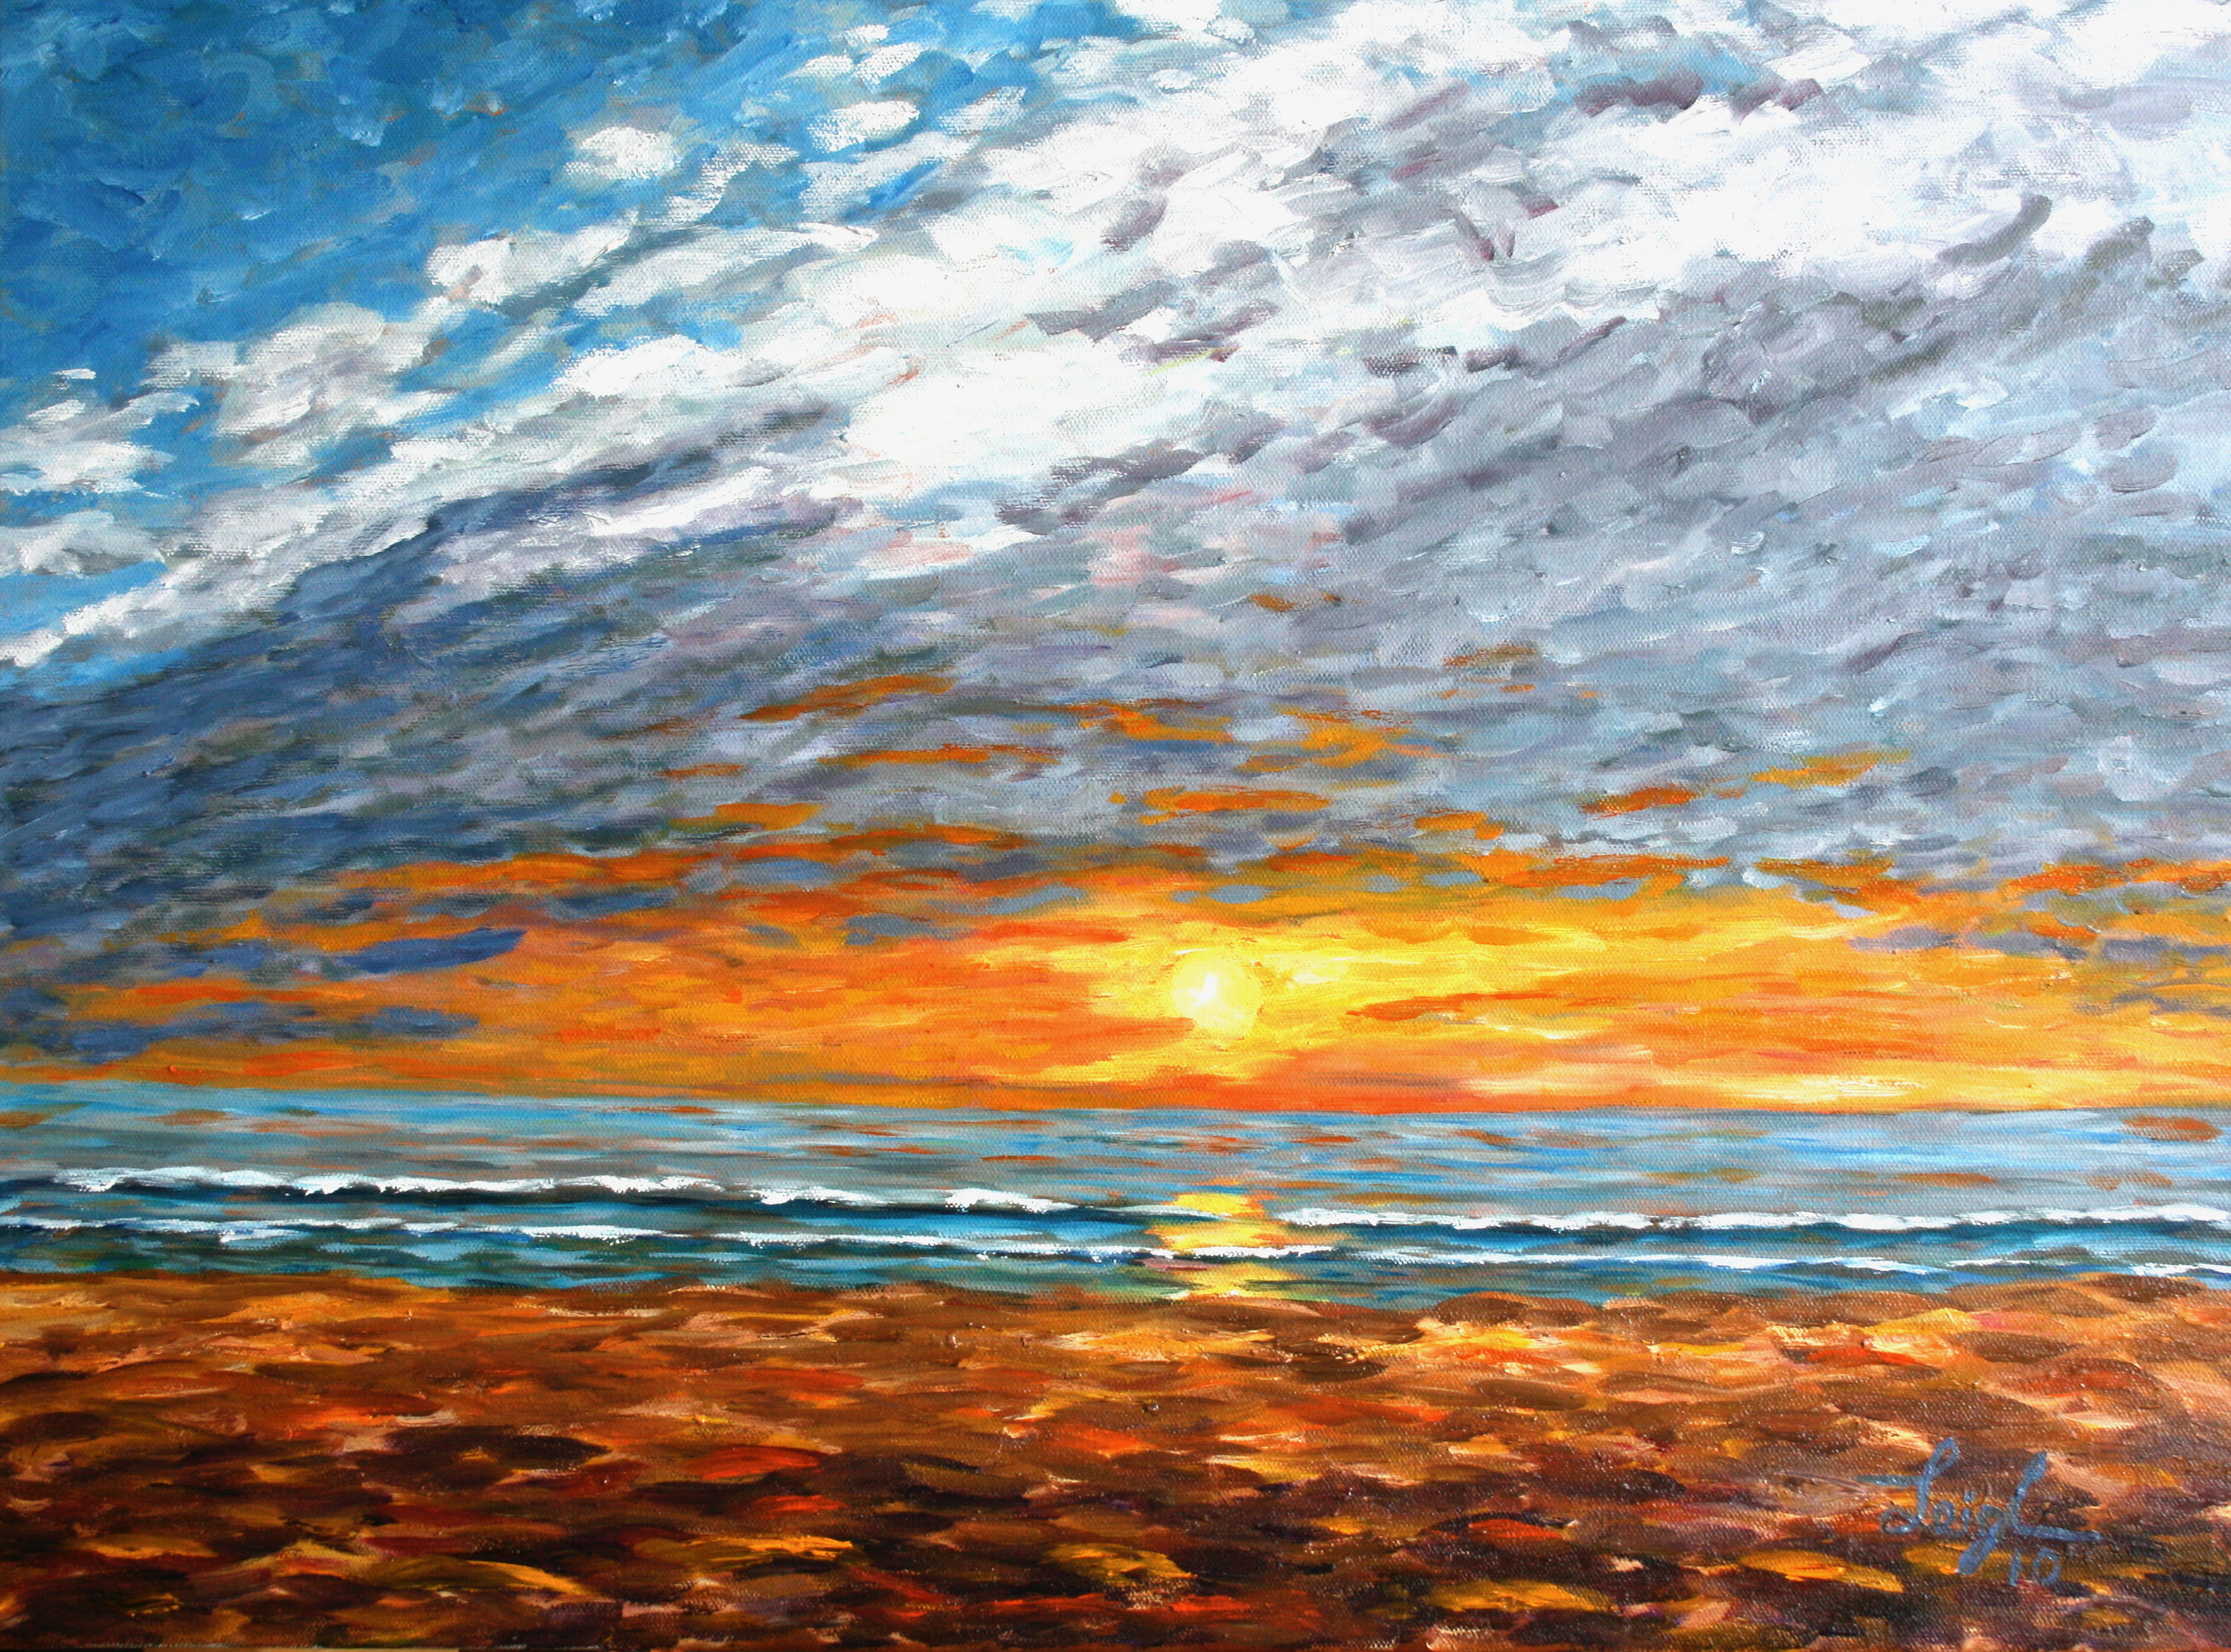 Carlsbad Sunset  ~  
Private Collection, Escondido CA
2010 • 24 x 18